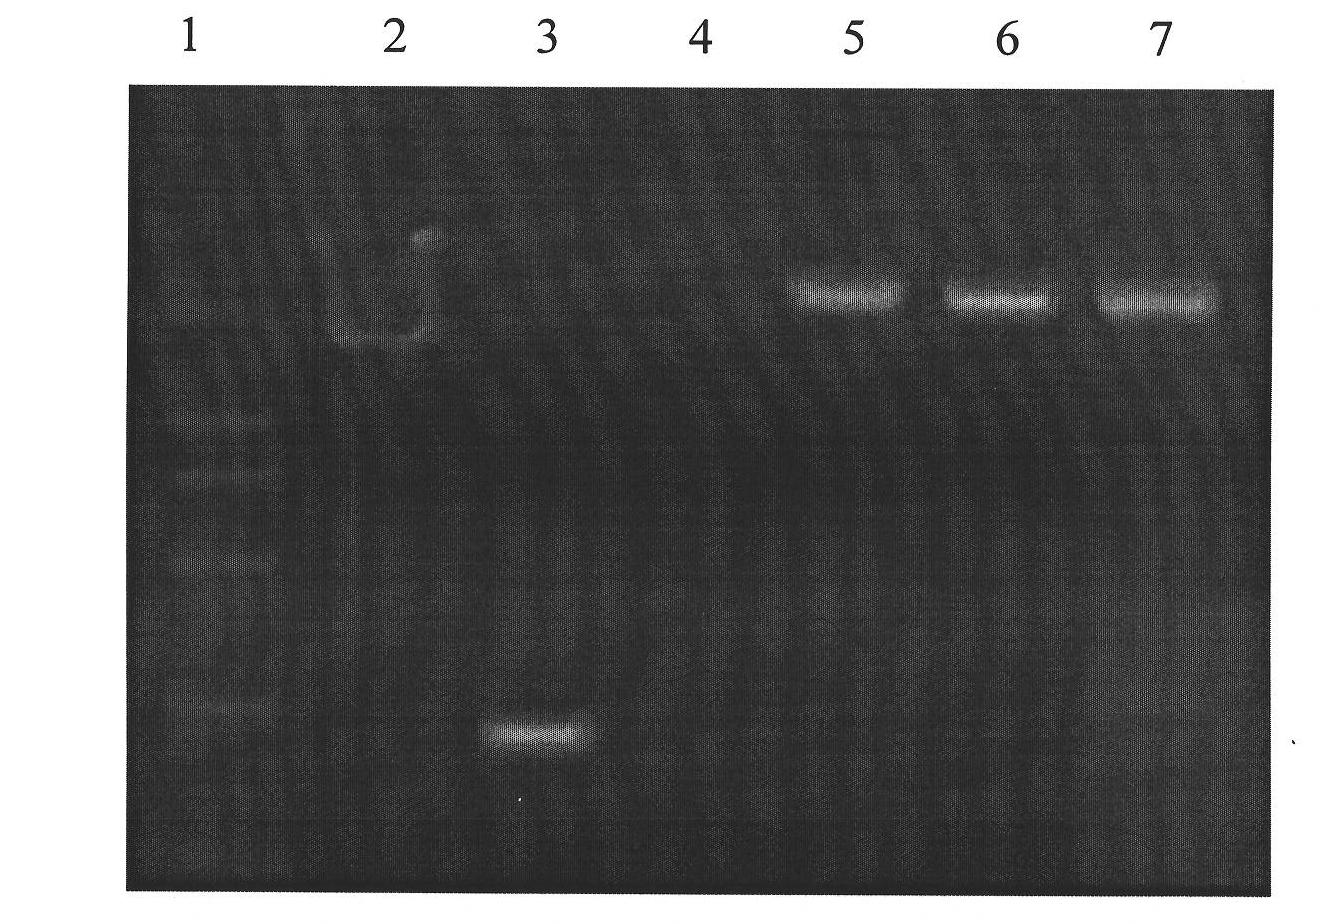 Mink growth hormone releasing hormone cDNA and application thereof